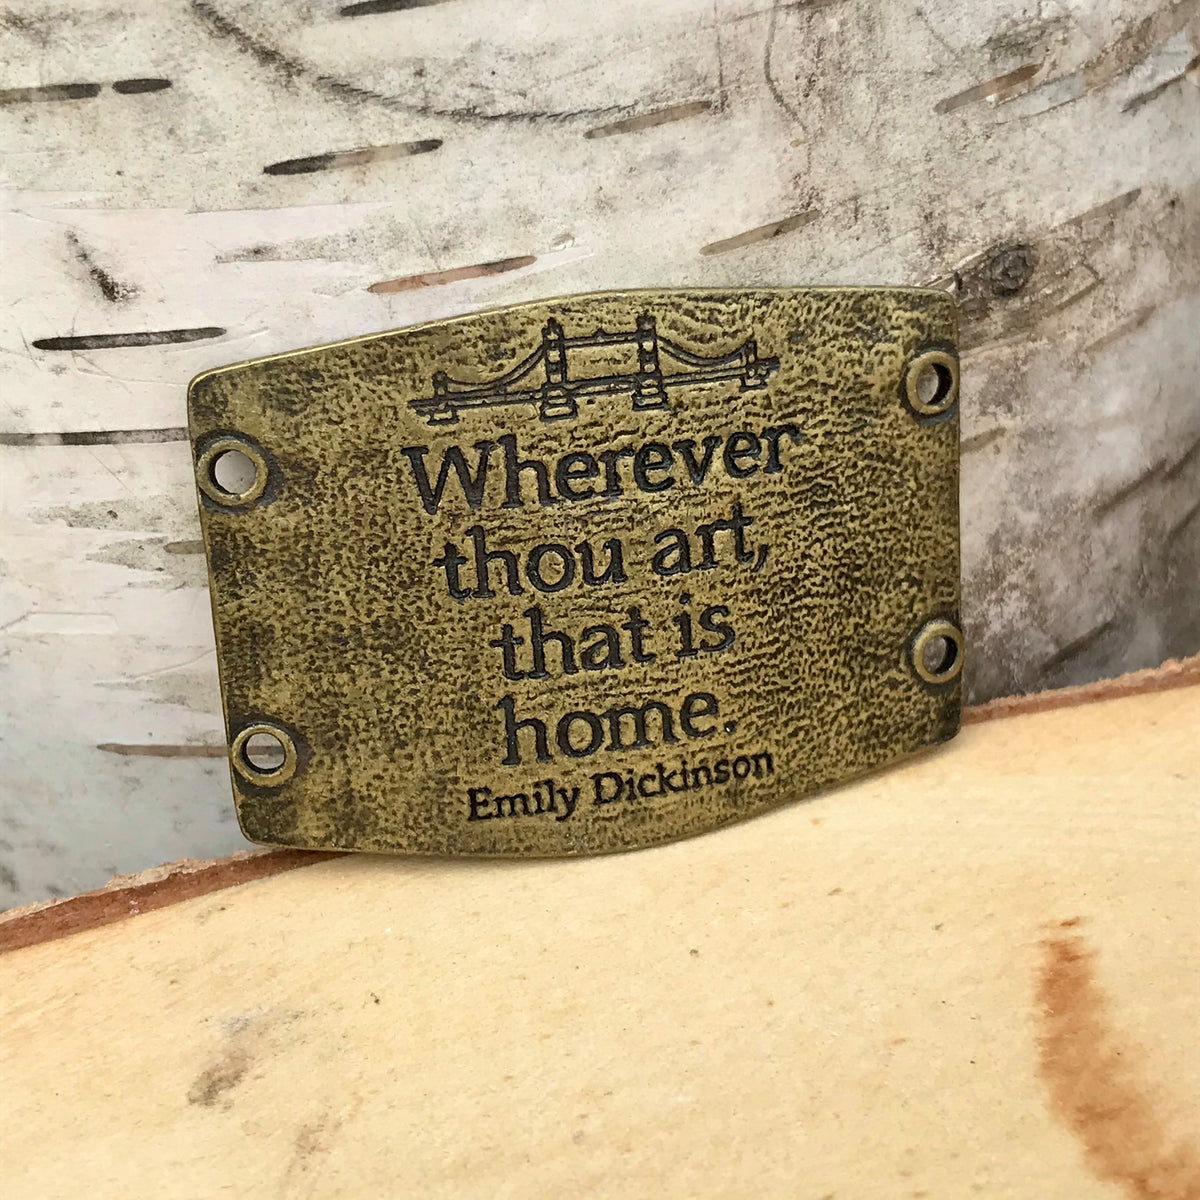 Antique brass colored Lenny & Eva bracelet sentiment that reads, "Wherever thou art, that is home." Quote by Emily Dickinson. Adorned with a bridge design above the quote.